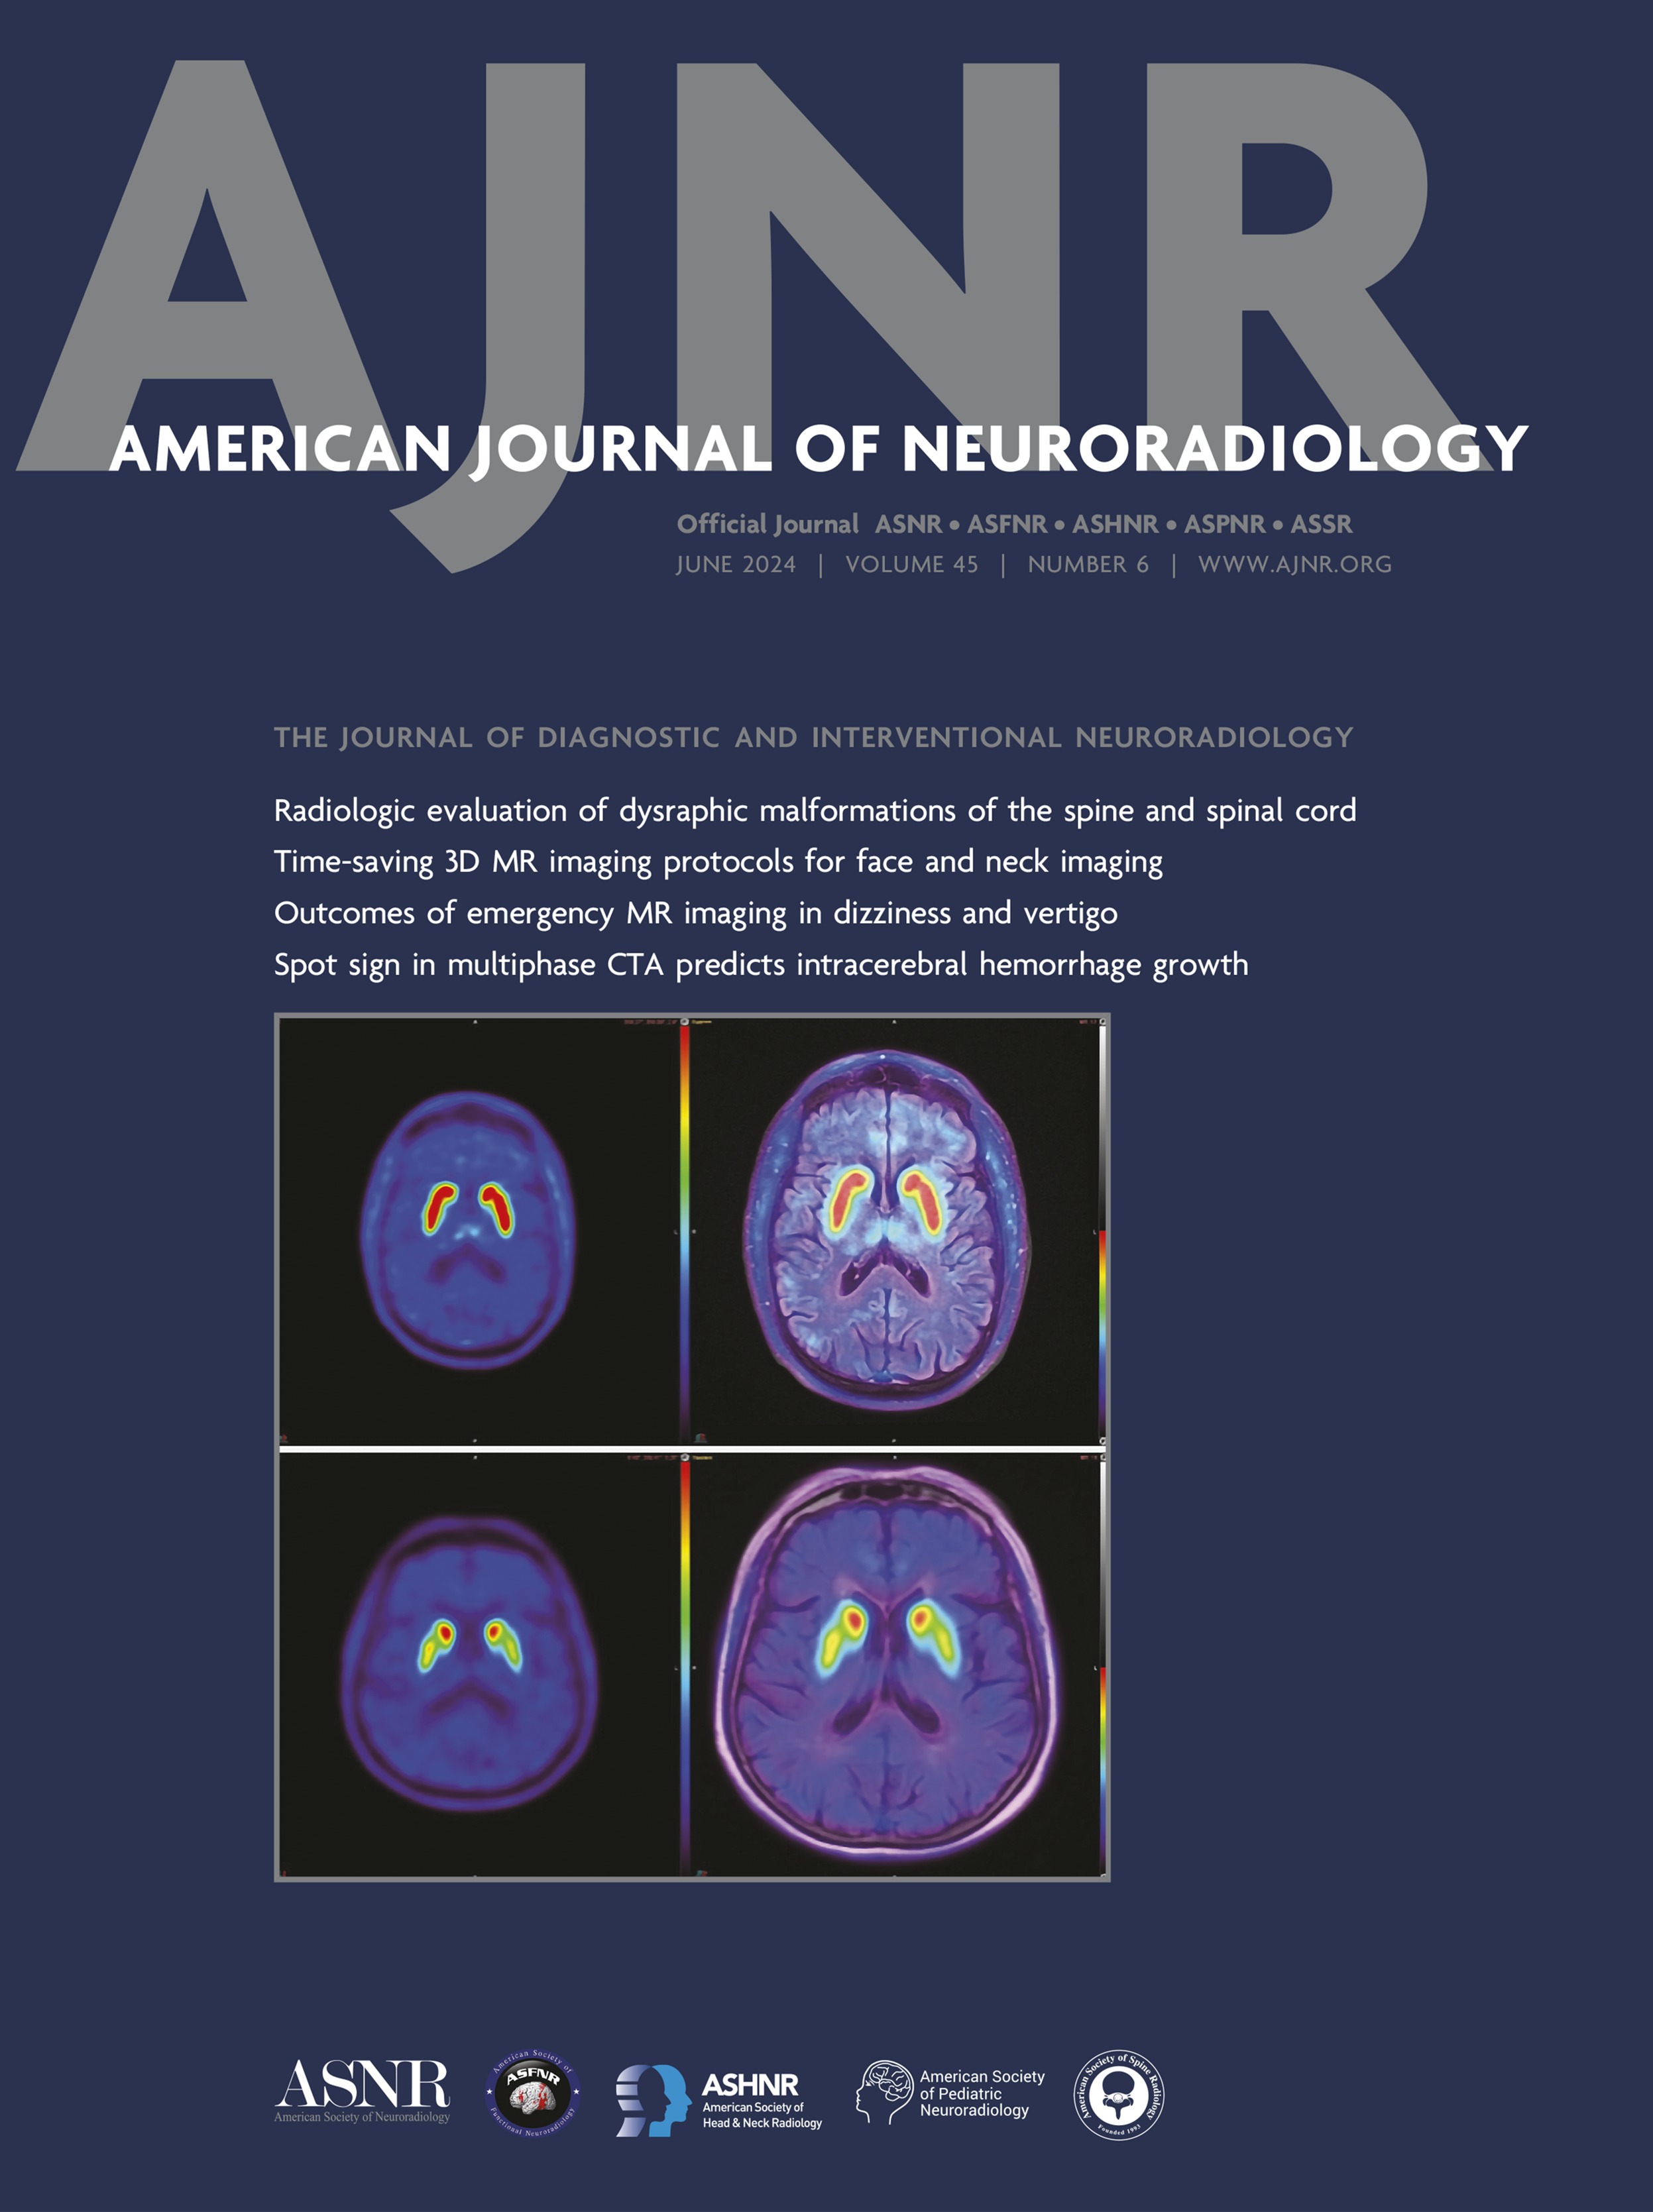 Timing of Spot Sign Appearance, Spot Sign Volume, and Leakage Rate among Phases of Multiphase CTA Predict Intracerebral Hemorrhage Growth [NEUROVASCULAR/STROKE IMAGING]